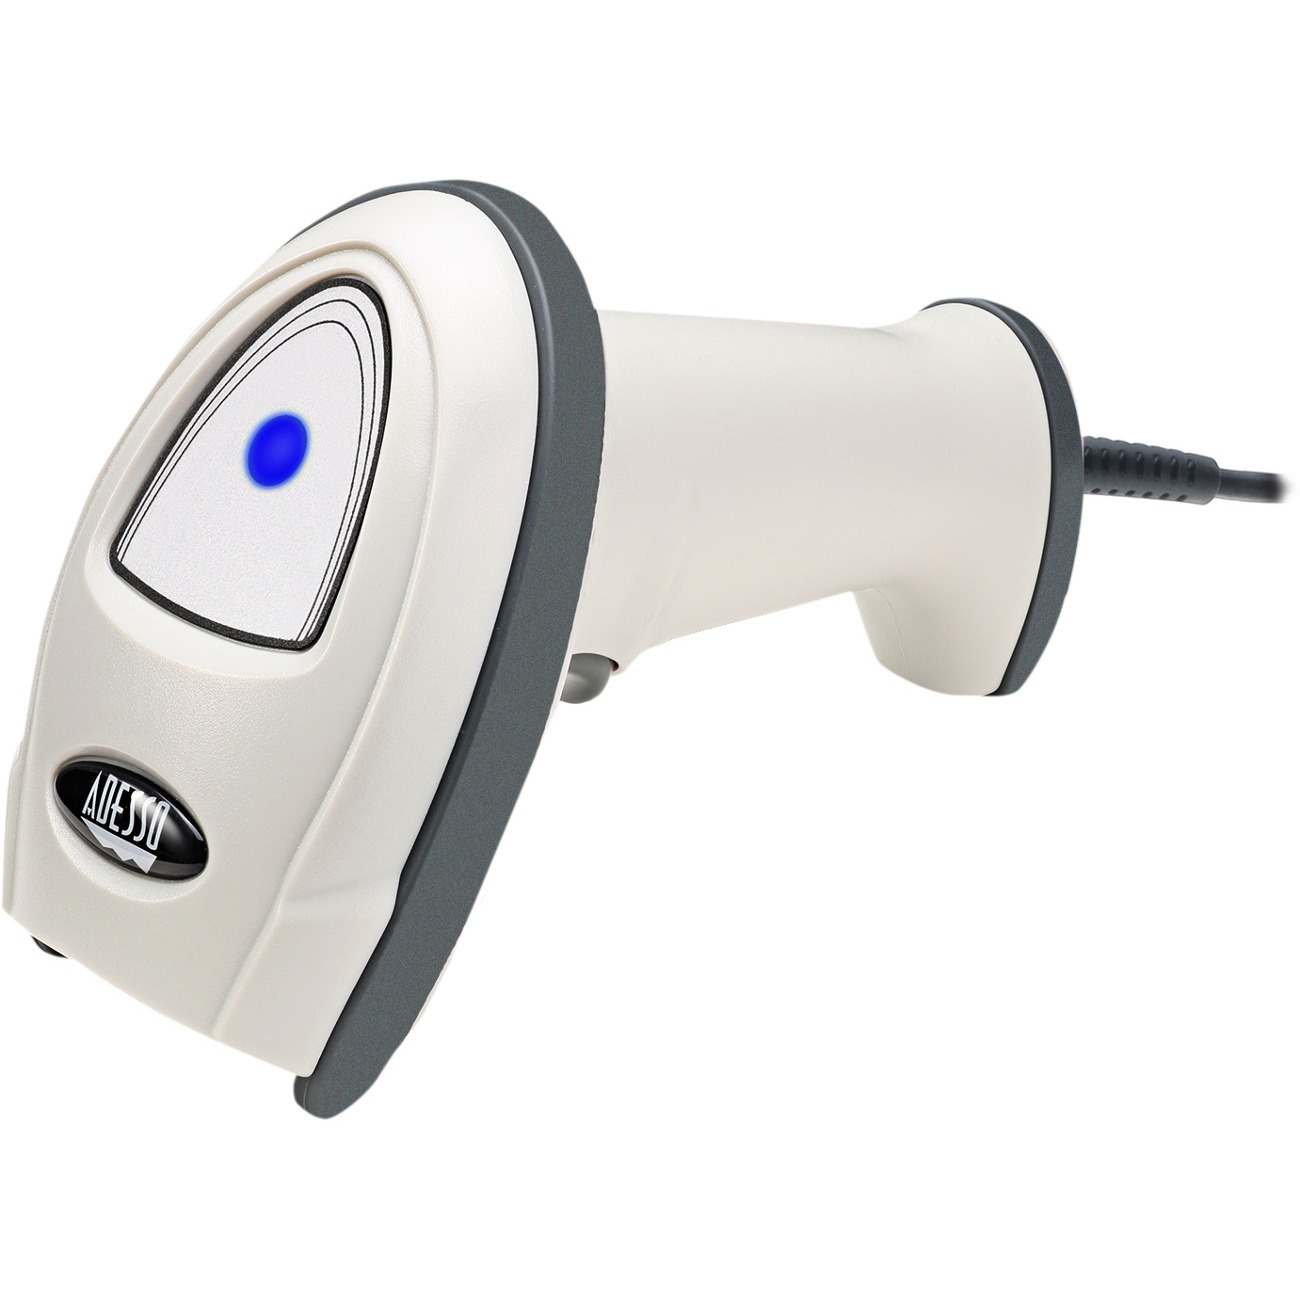 Adesso NuScan 7600TU-W 2D Antimicrobial Handheld Barcode Scanner - White - image 4 of 5